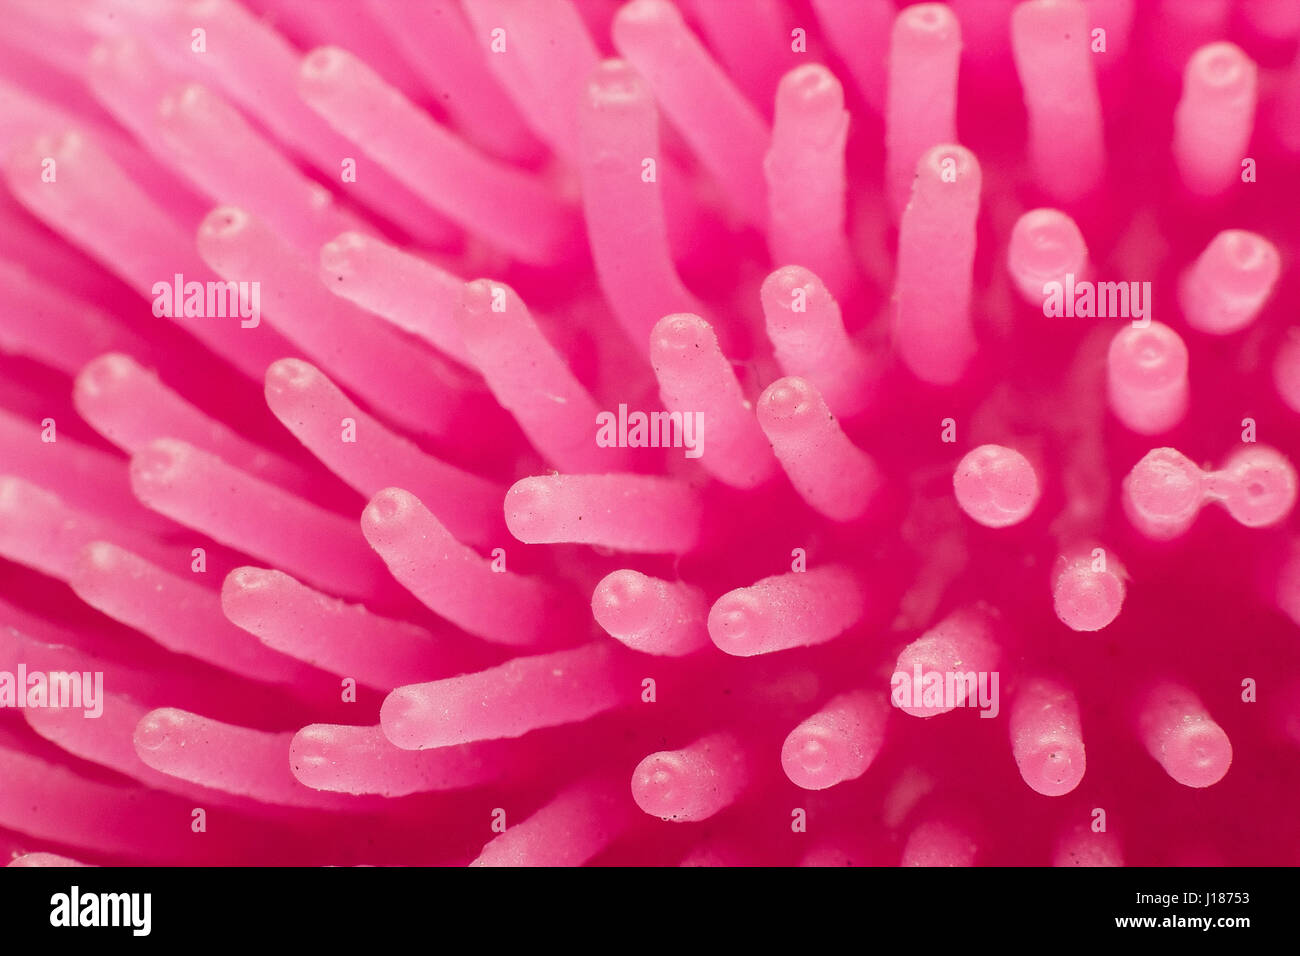 Abstrack pink anemone like texture background Stock Photo